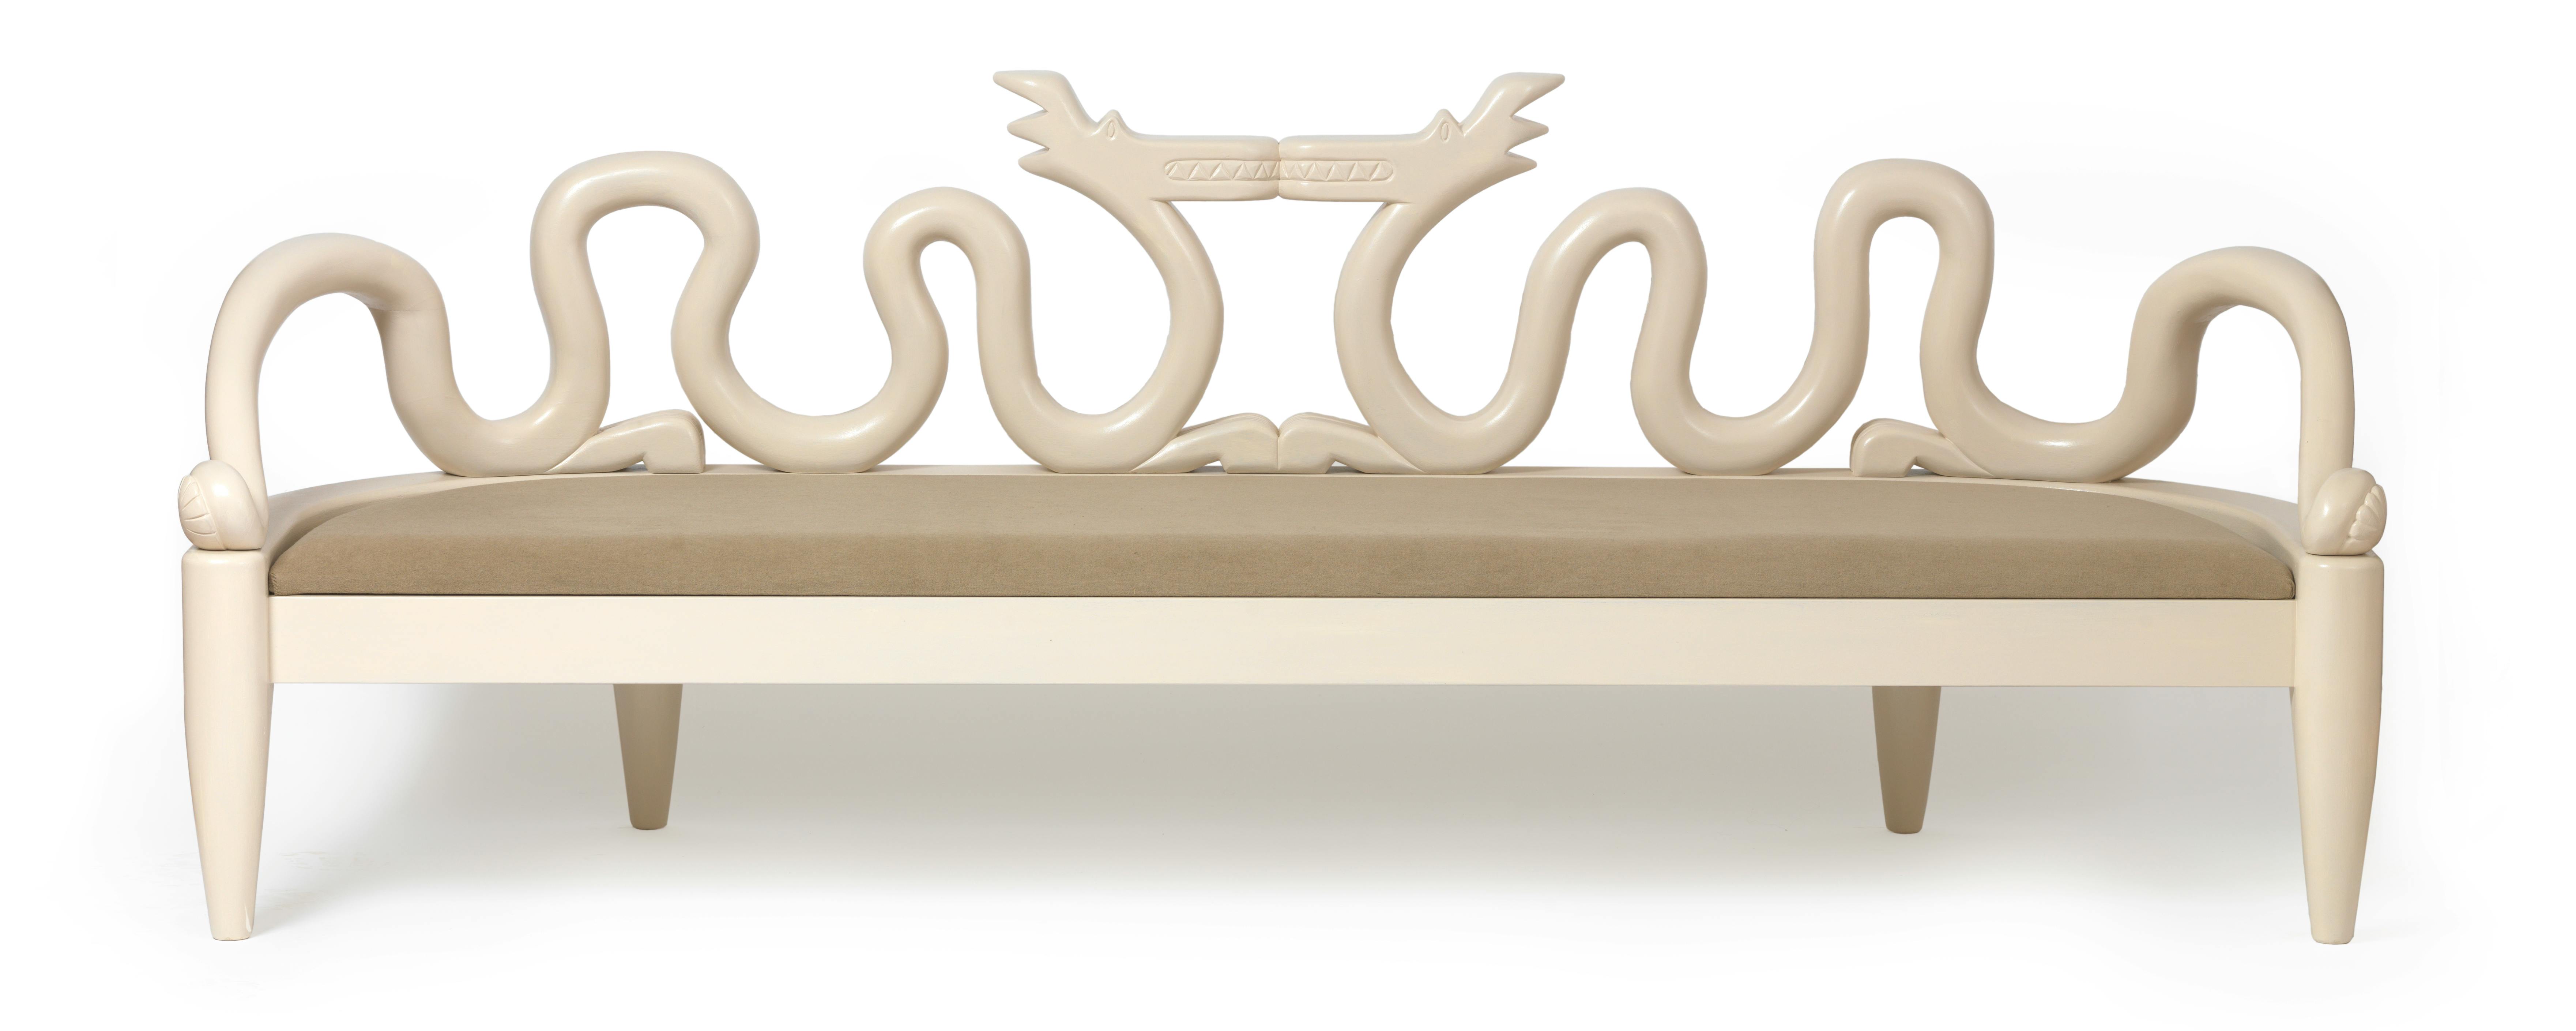 light tan carved wooden settee with dragon shaped back rest